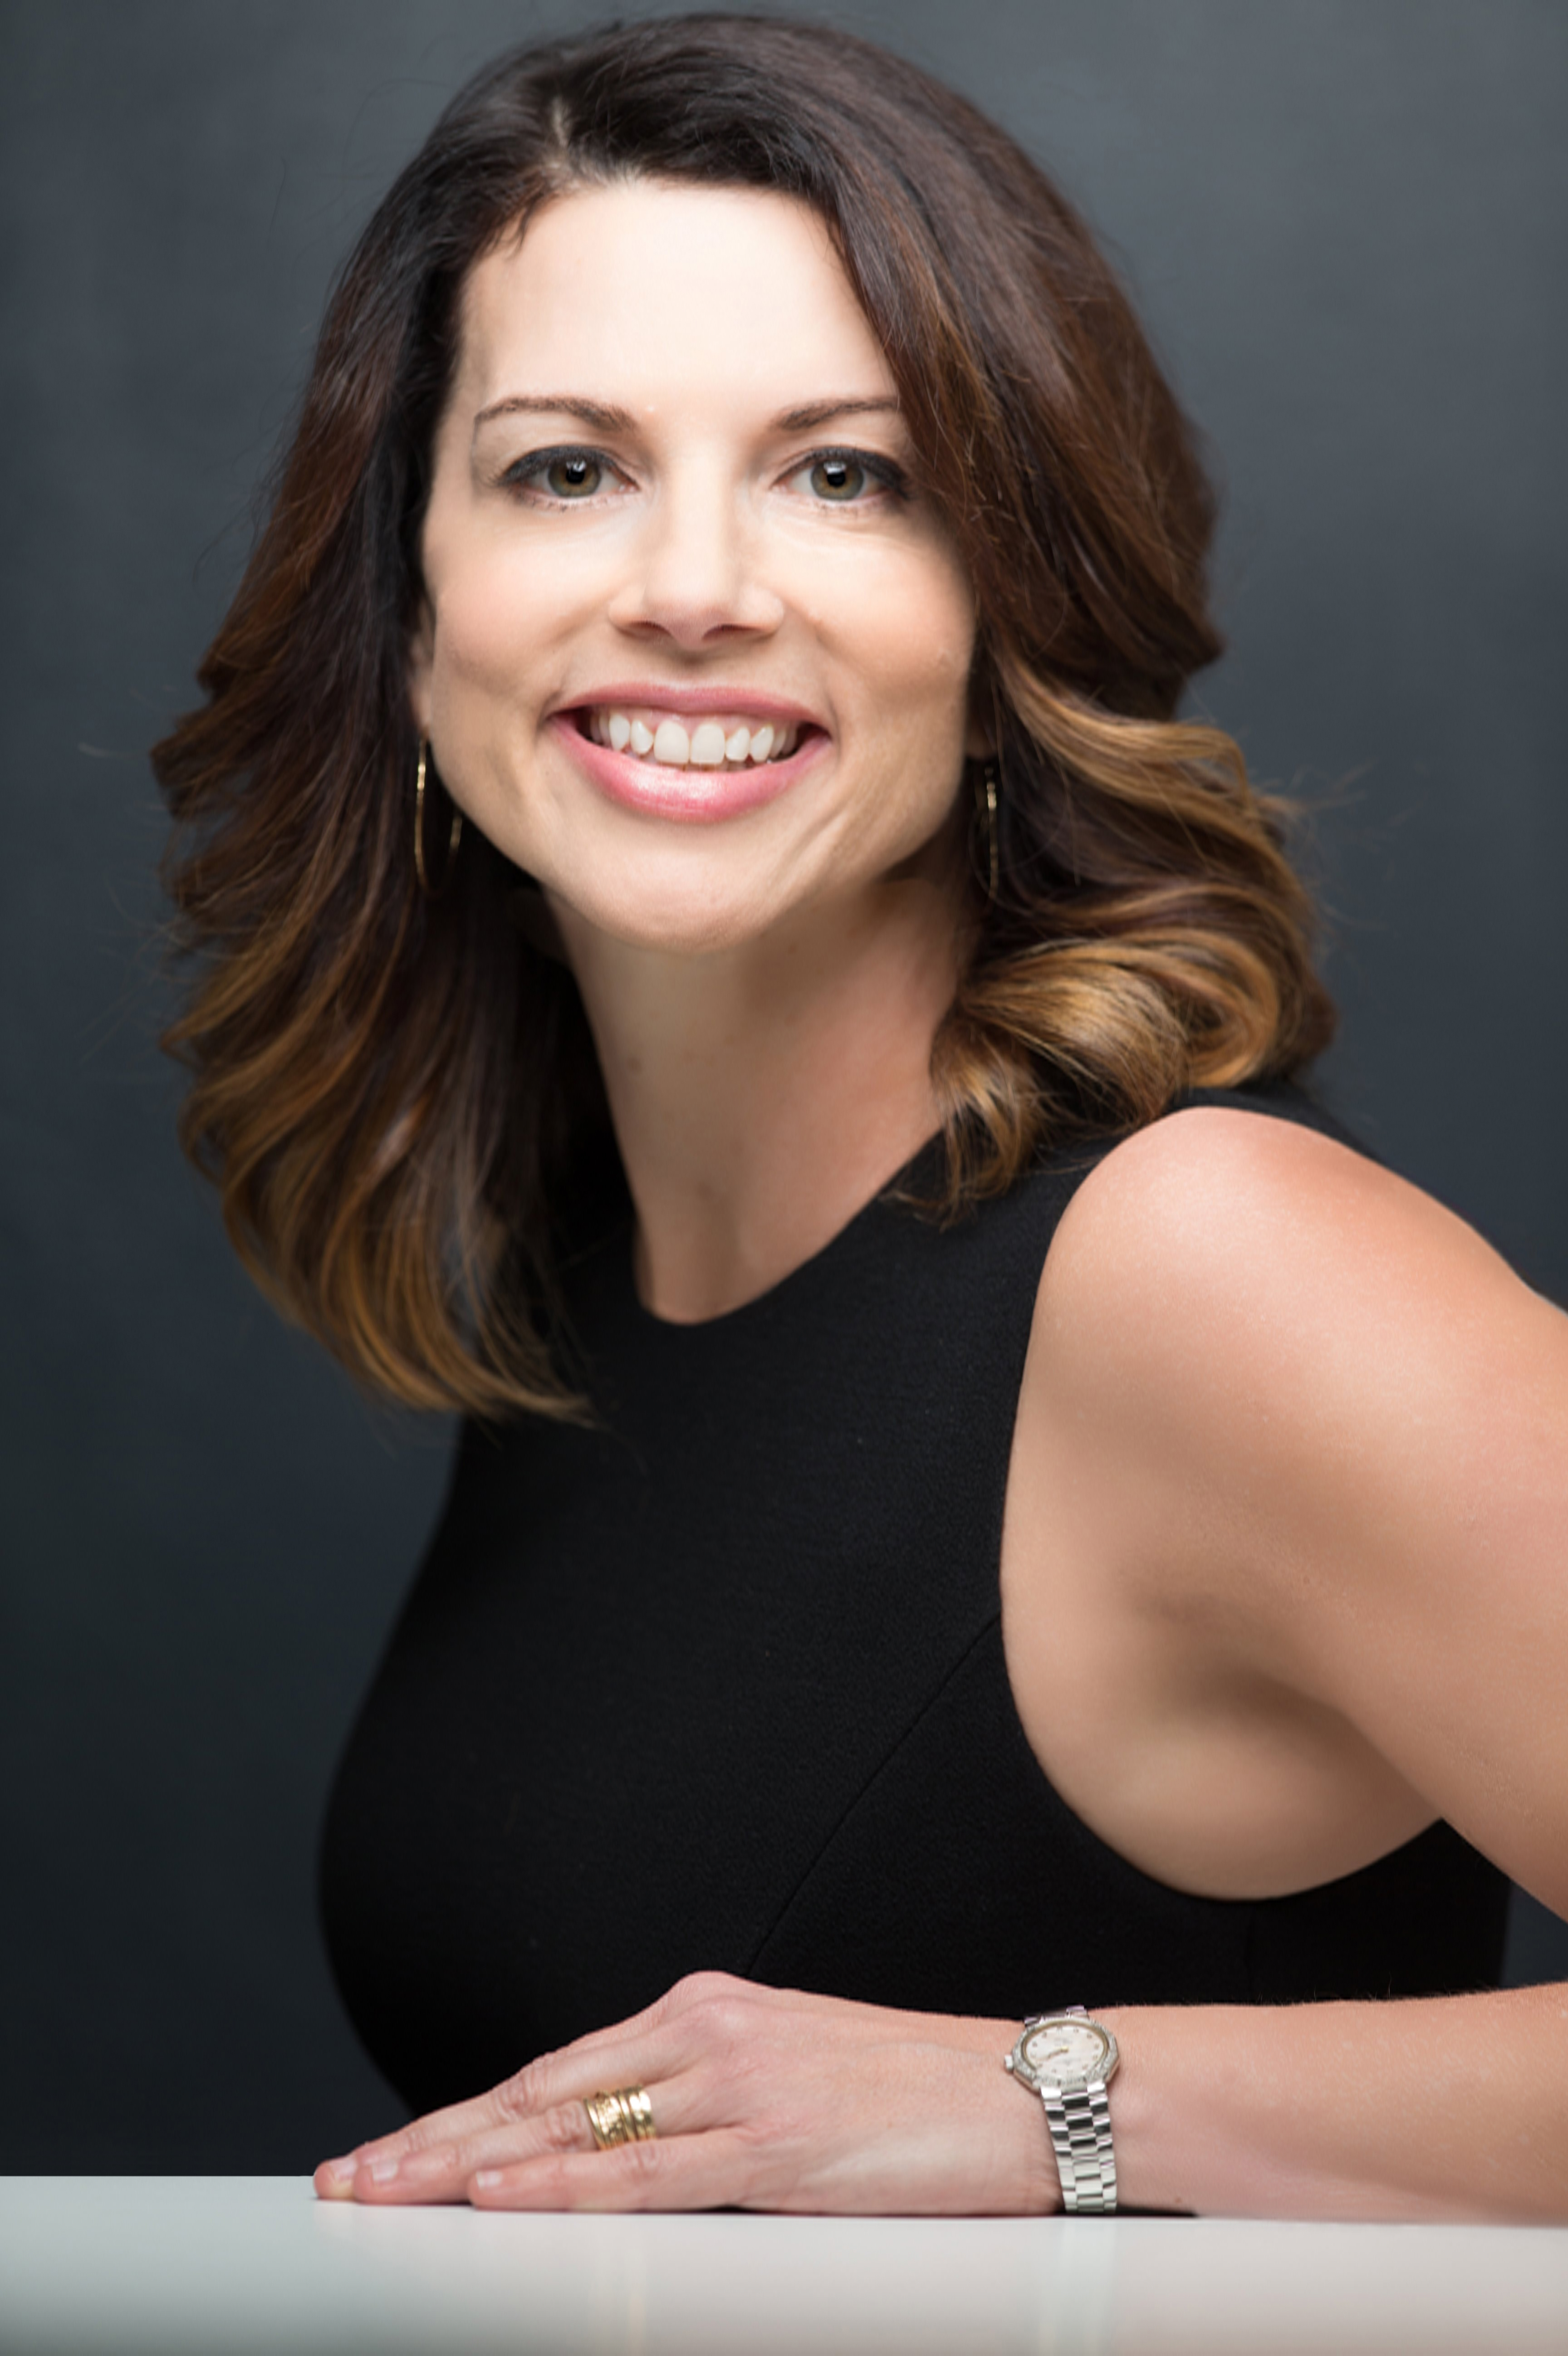 Tegna Board Elects Gina Bianchini As New Director Business Wire